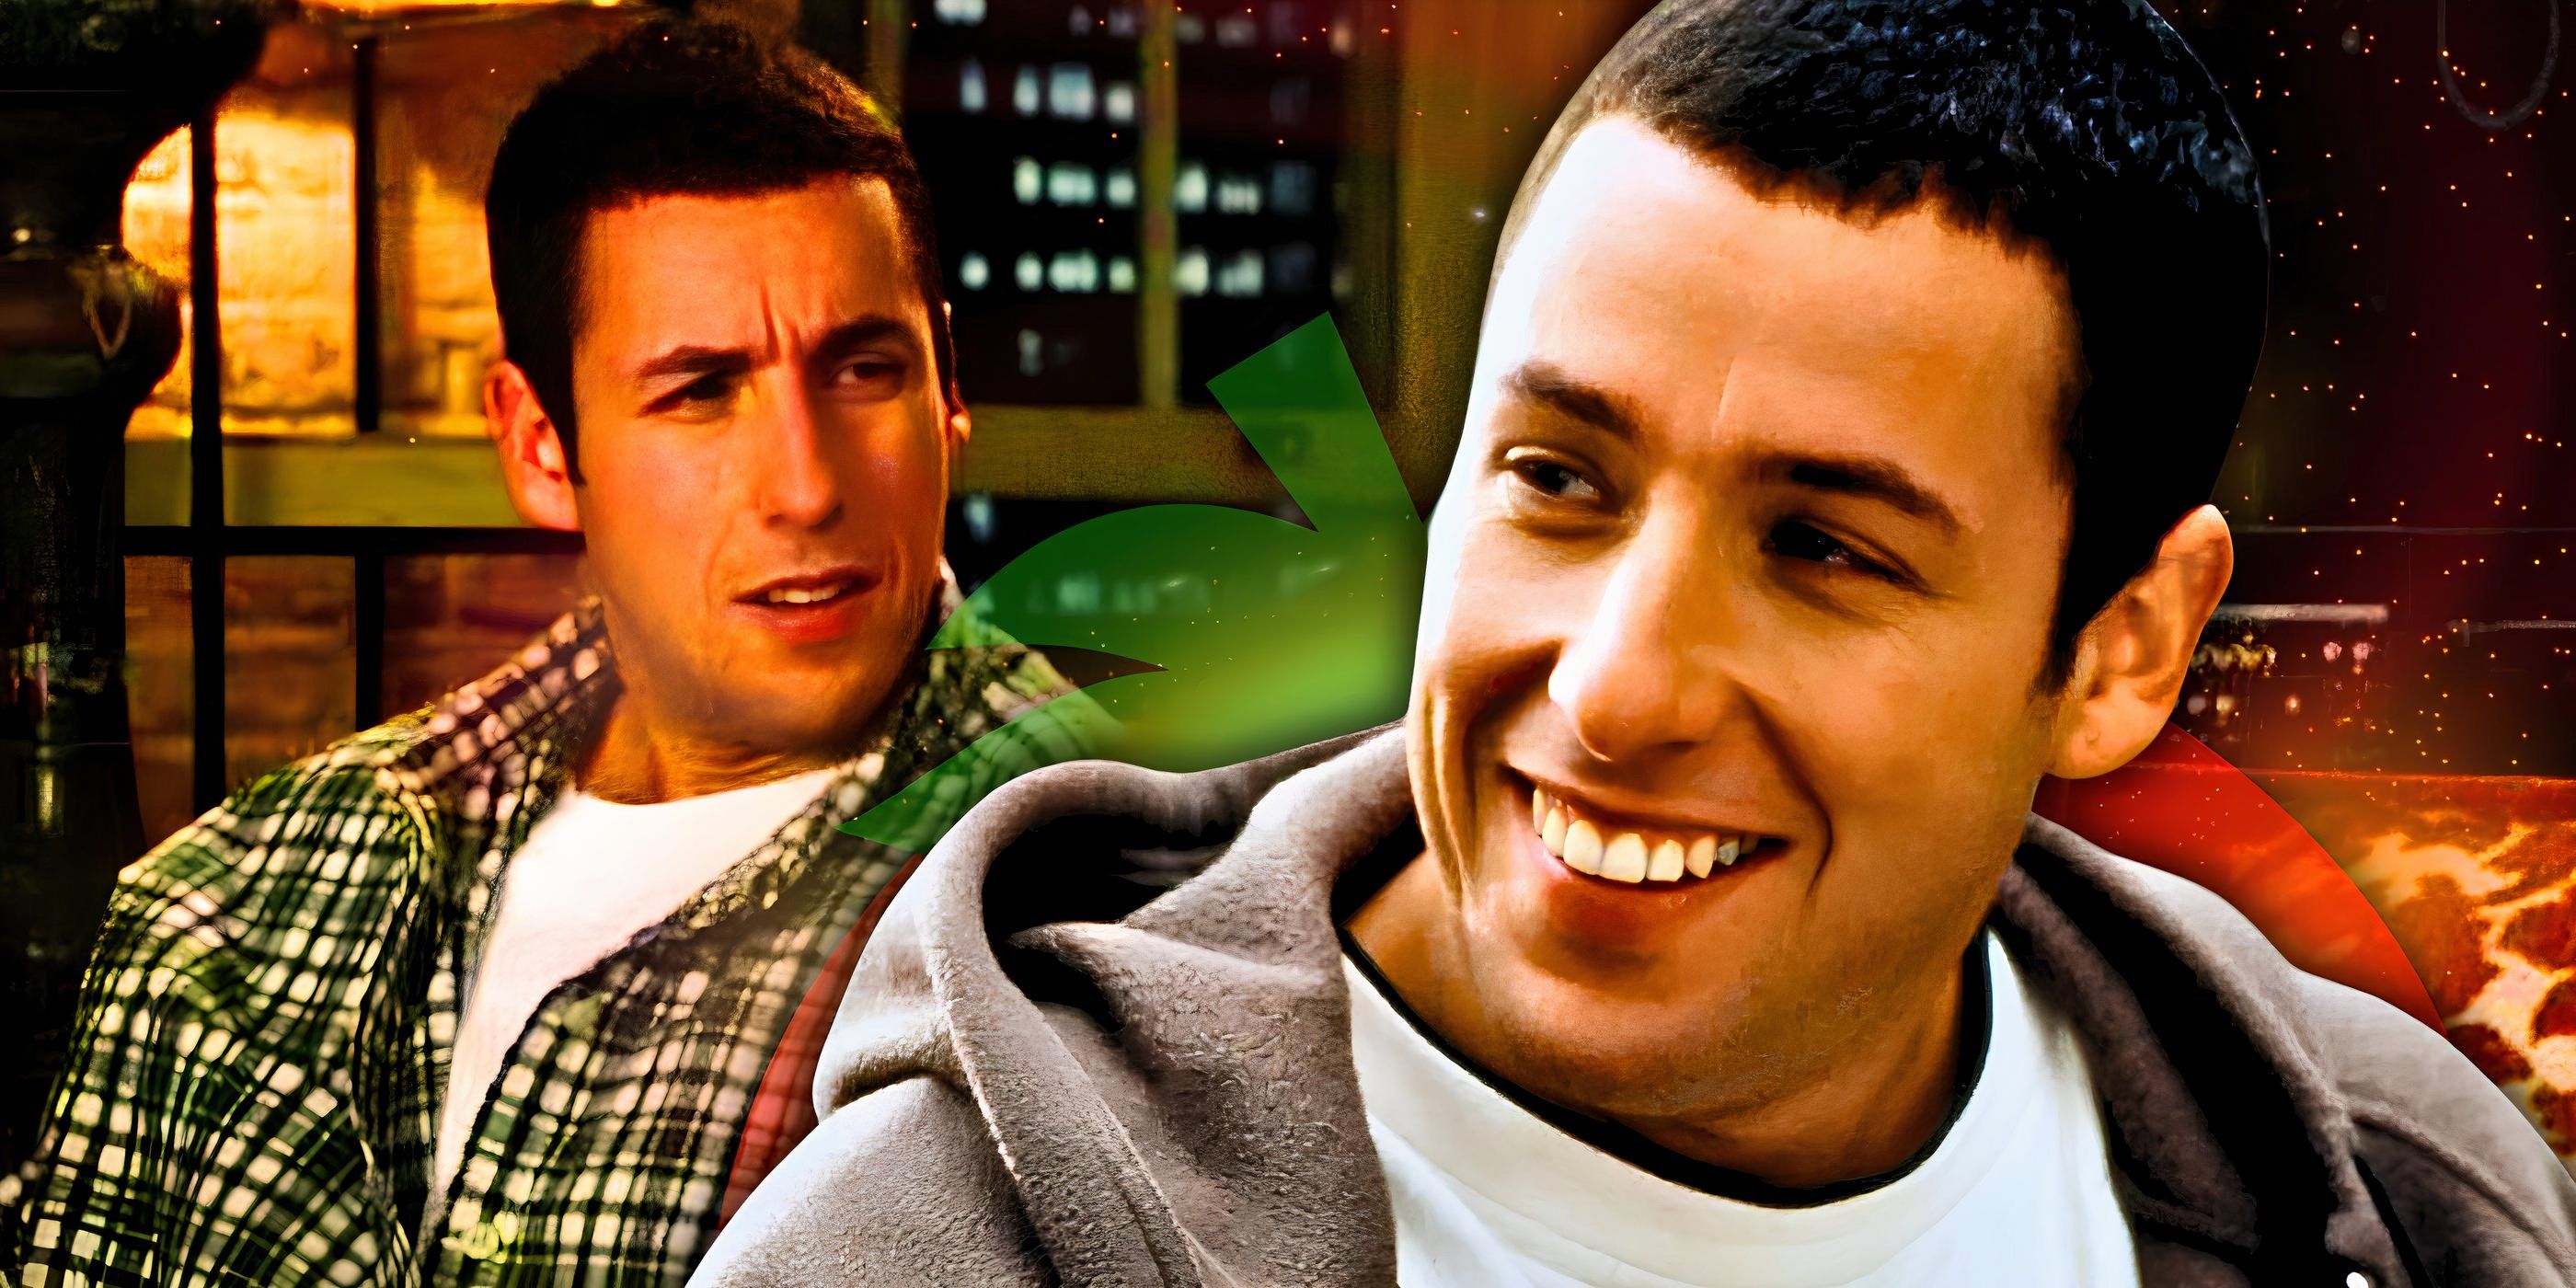 One Of Adam Sandler’s Best Comedies Is Now On Netflix & I’m Shocked By Its 39% RT Score